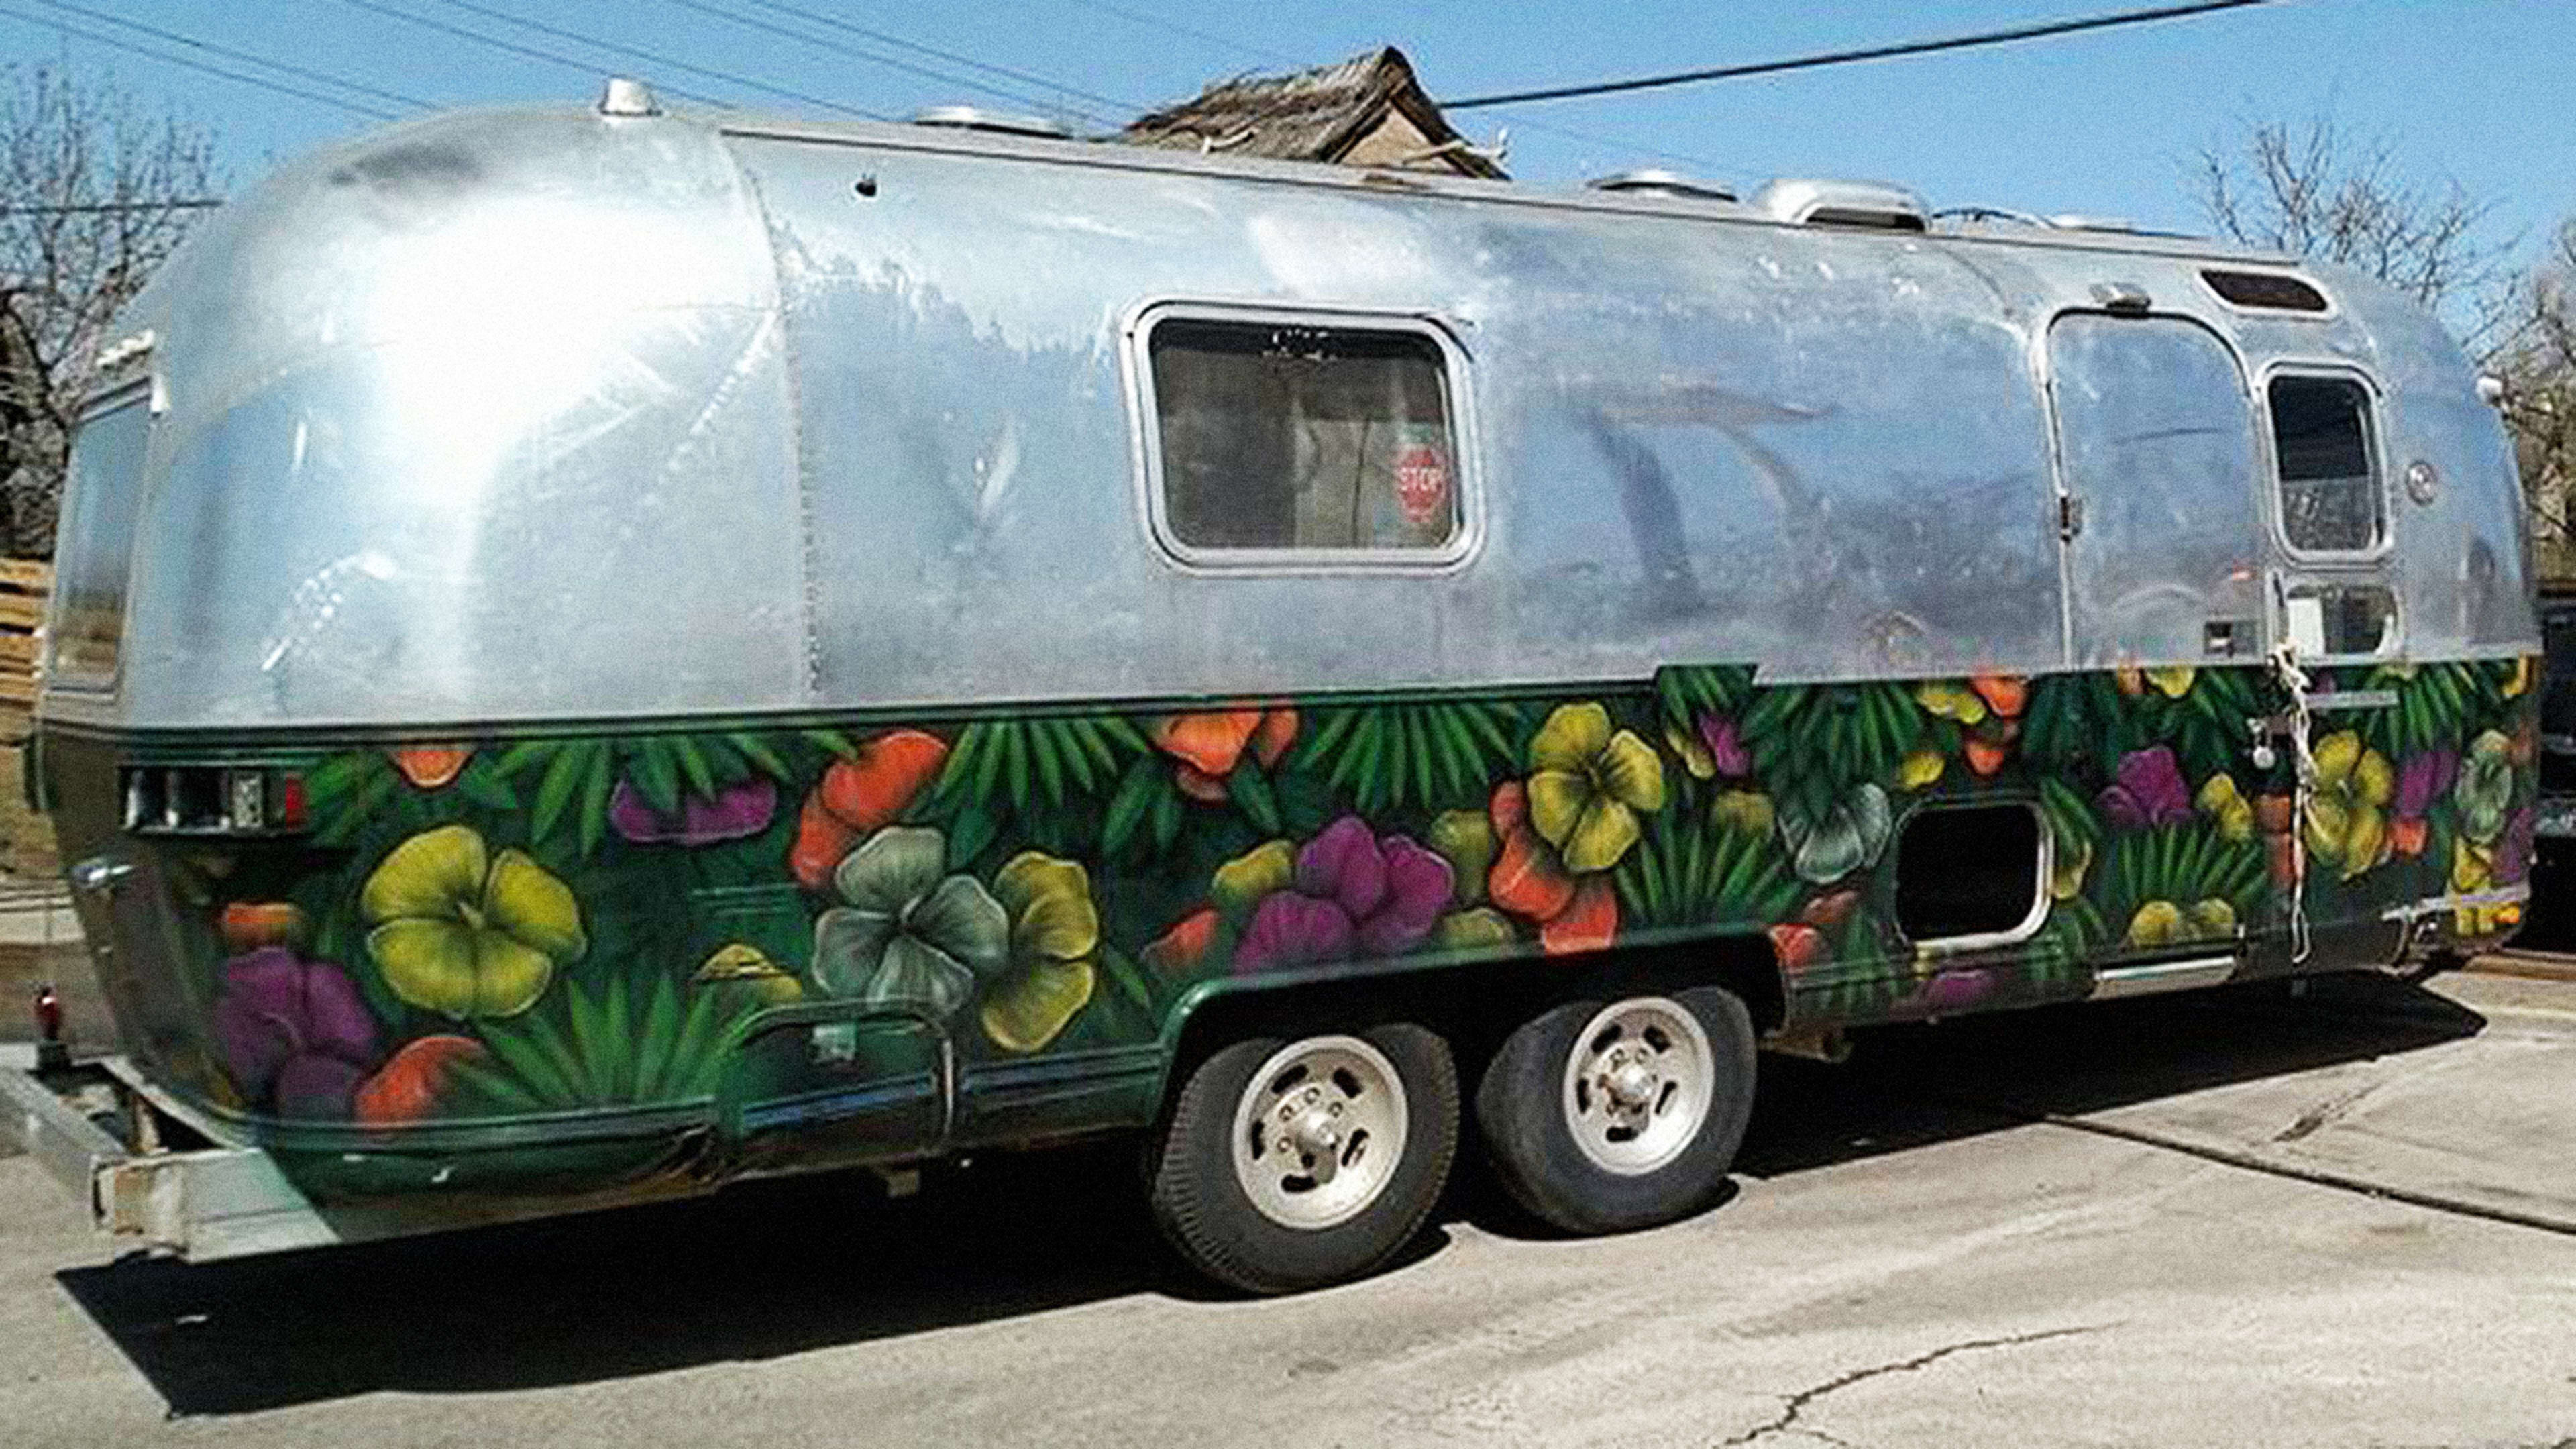 This Vintage Airstream Will Be A Mobile Shop For Fair Trade Goods